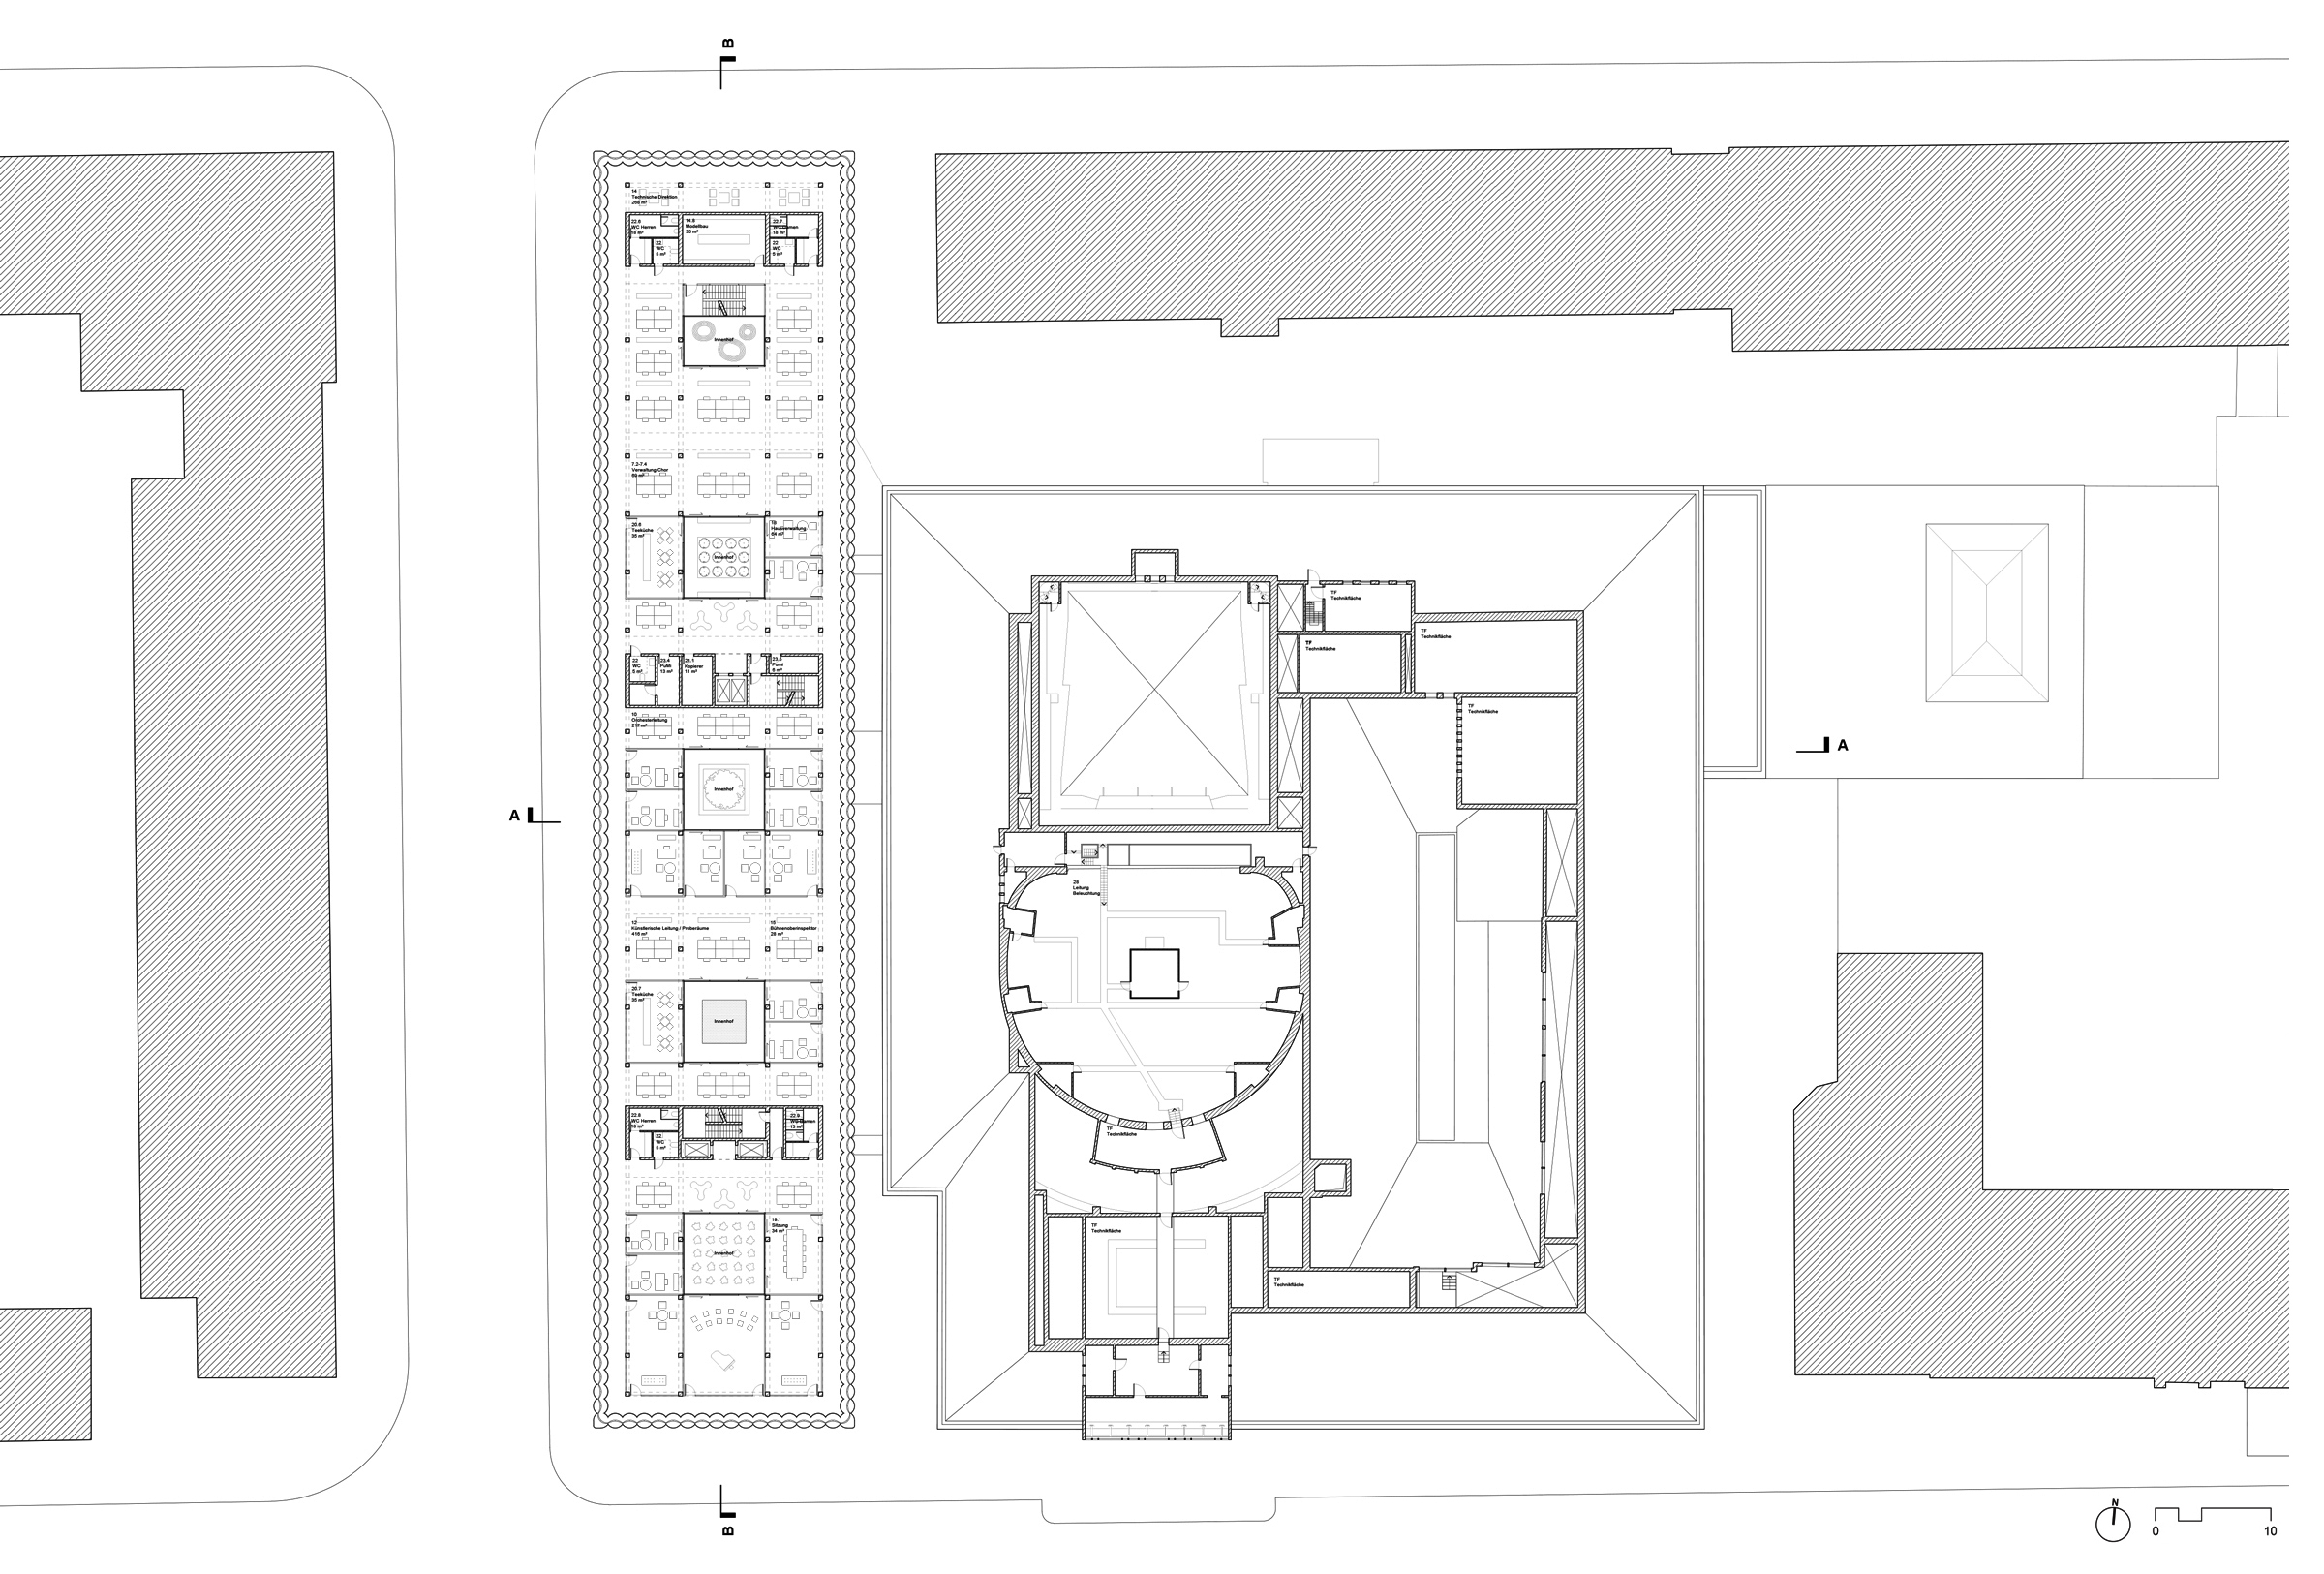 Lower office level plan of the Komische Oper Expansion.